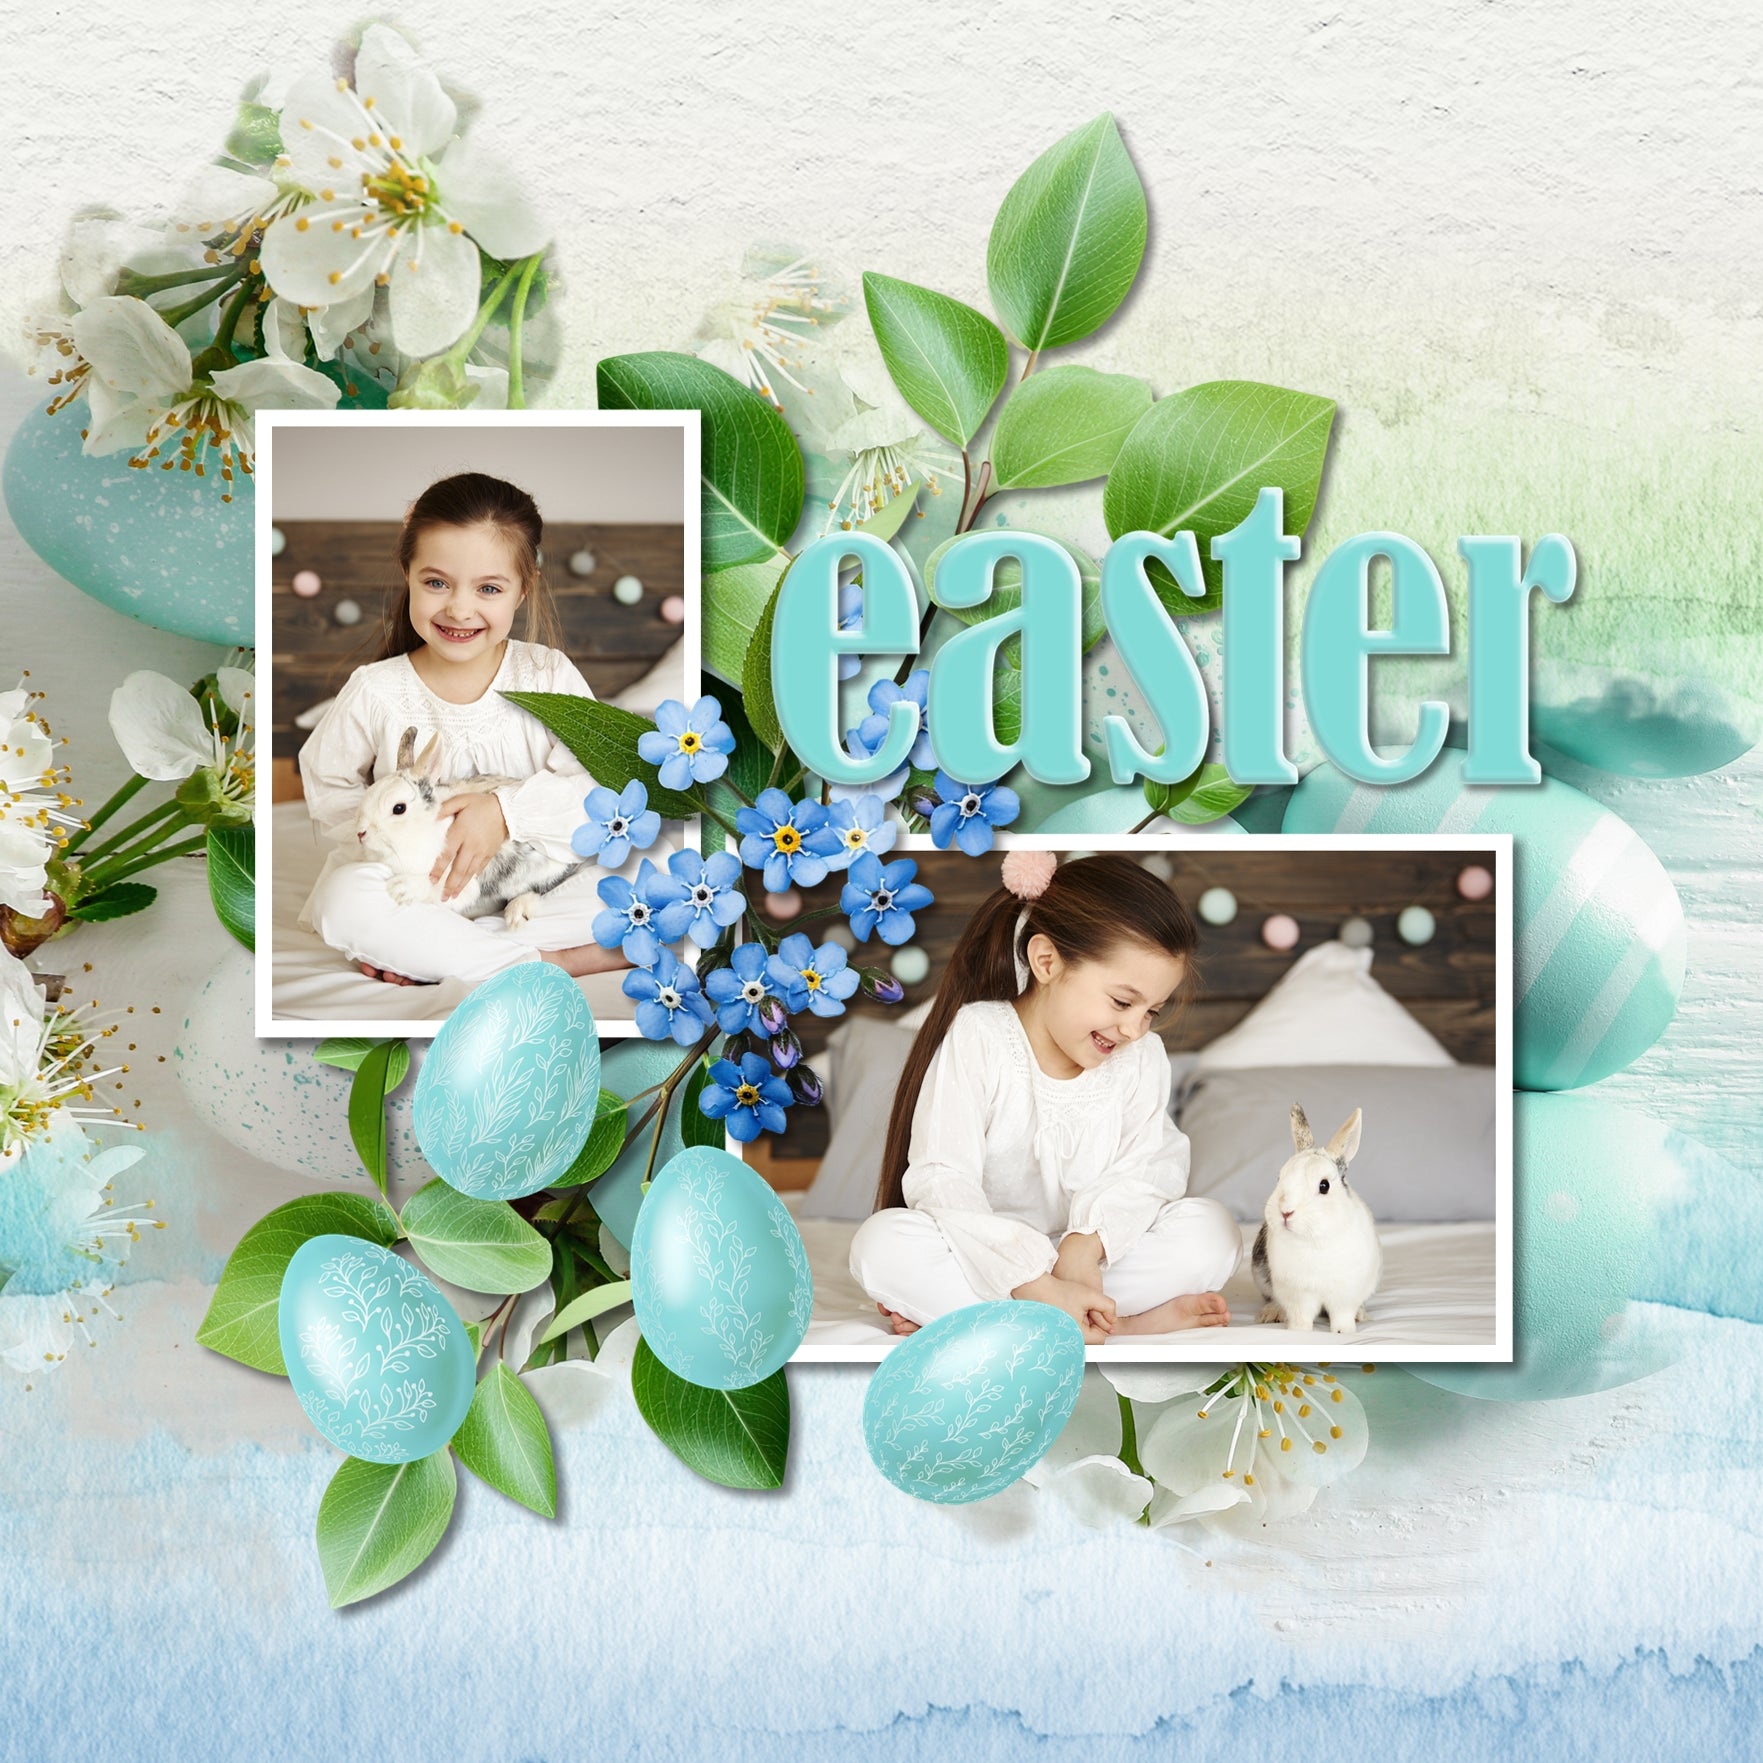 These fun and bright realistic digital scrapbooking embellishments by Lucky Girl Creative digital art are perfect for all your Easter, spring, and flower garden pages. Imagine the cute Easter Egg Hunt and Easter Bunny pages you could make!